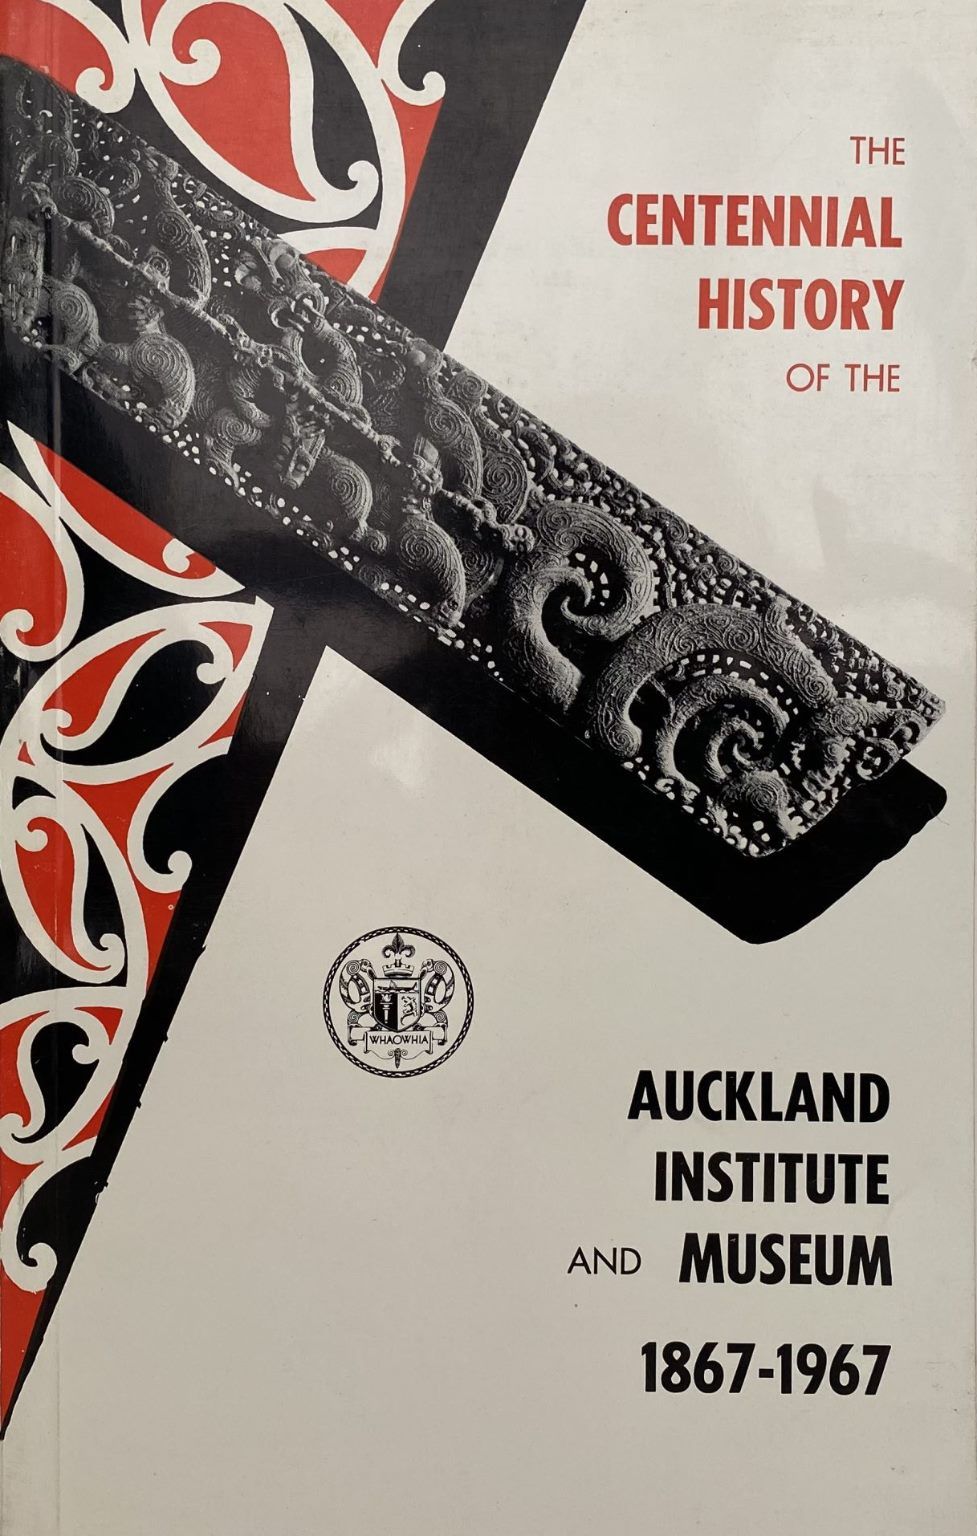 The Centennial History of the Auckland Institute and Museum 1867-1967